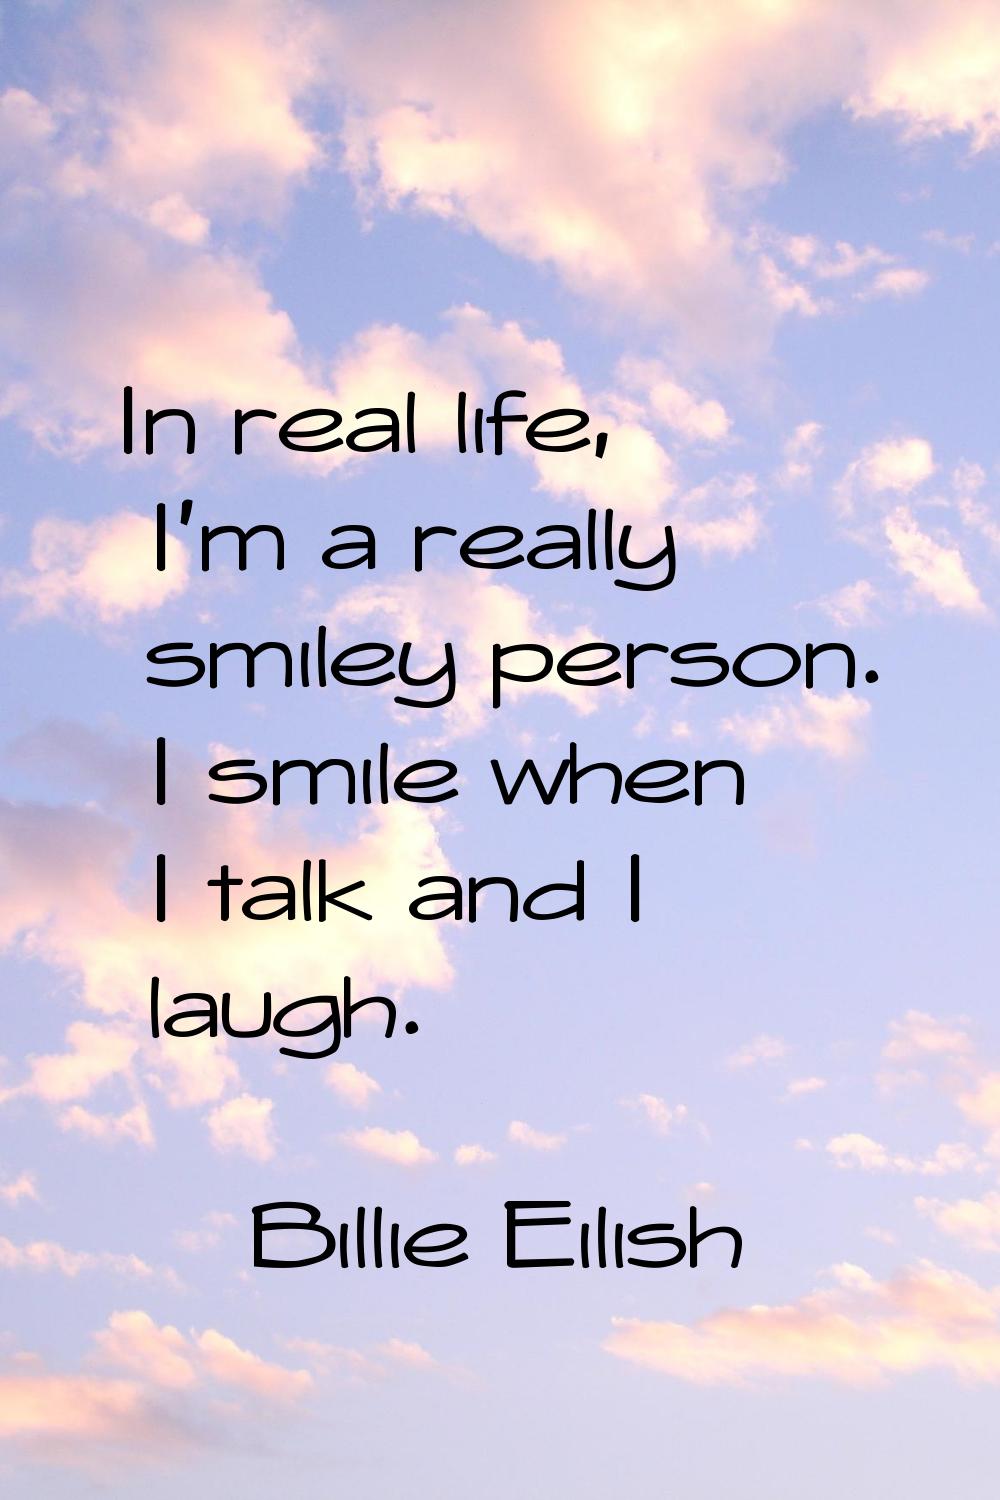 In real life, I'm a really smiley person. I smile when I talk and I laugh.